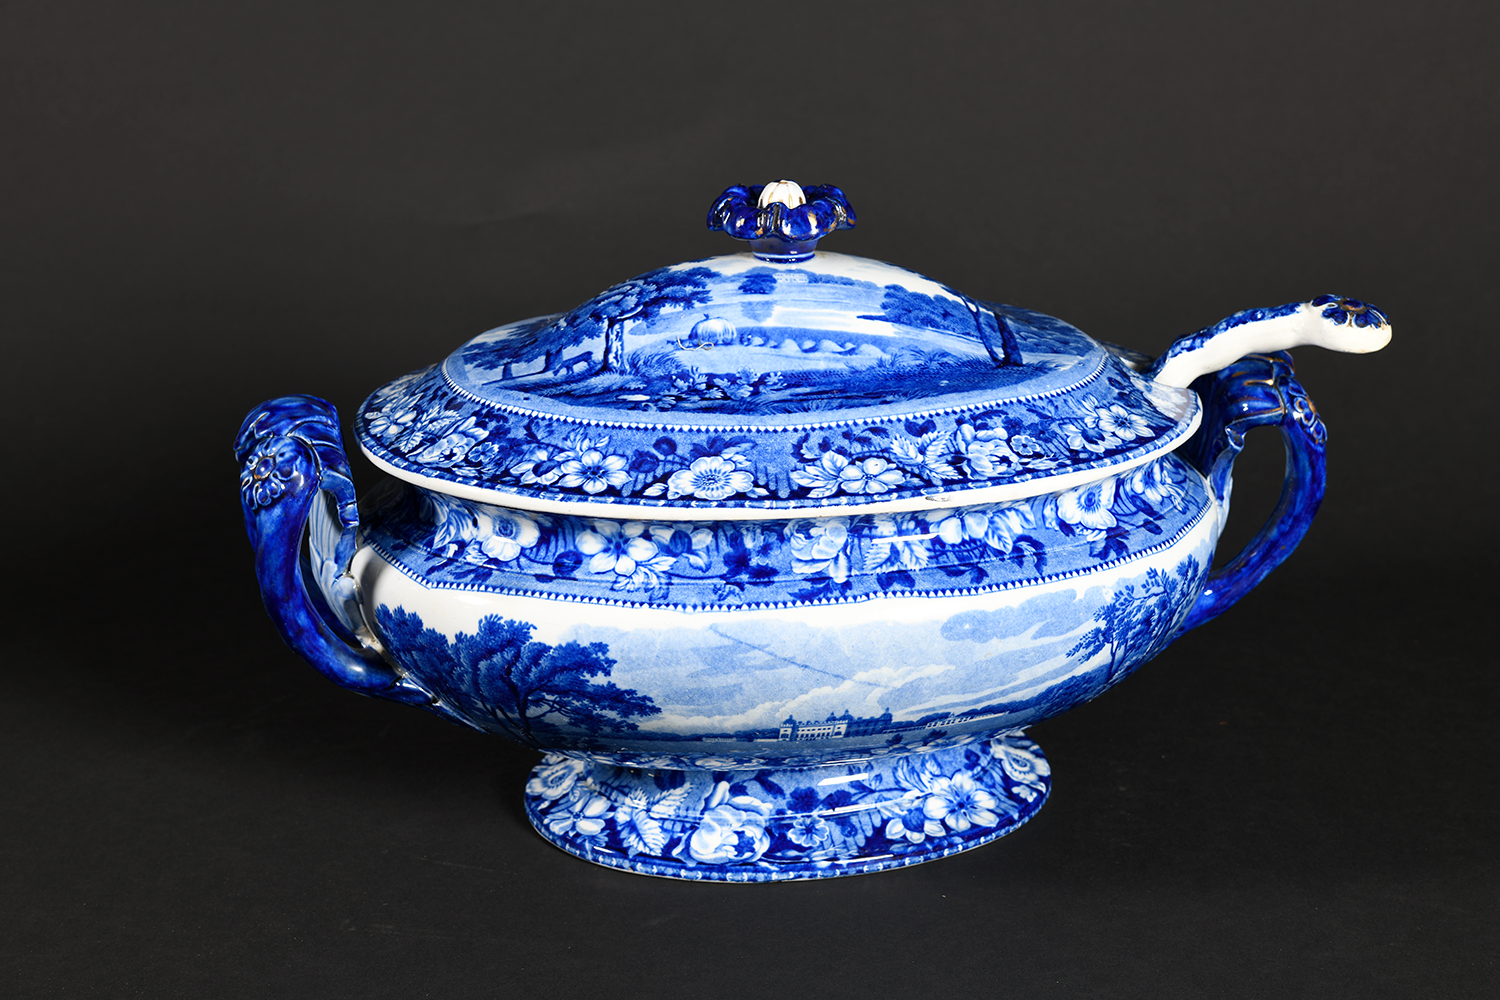 Blue-transfer decorated Staffordshire pottery.